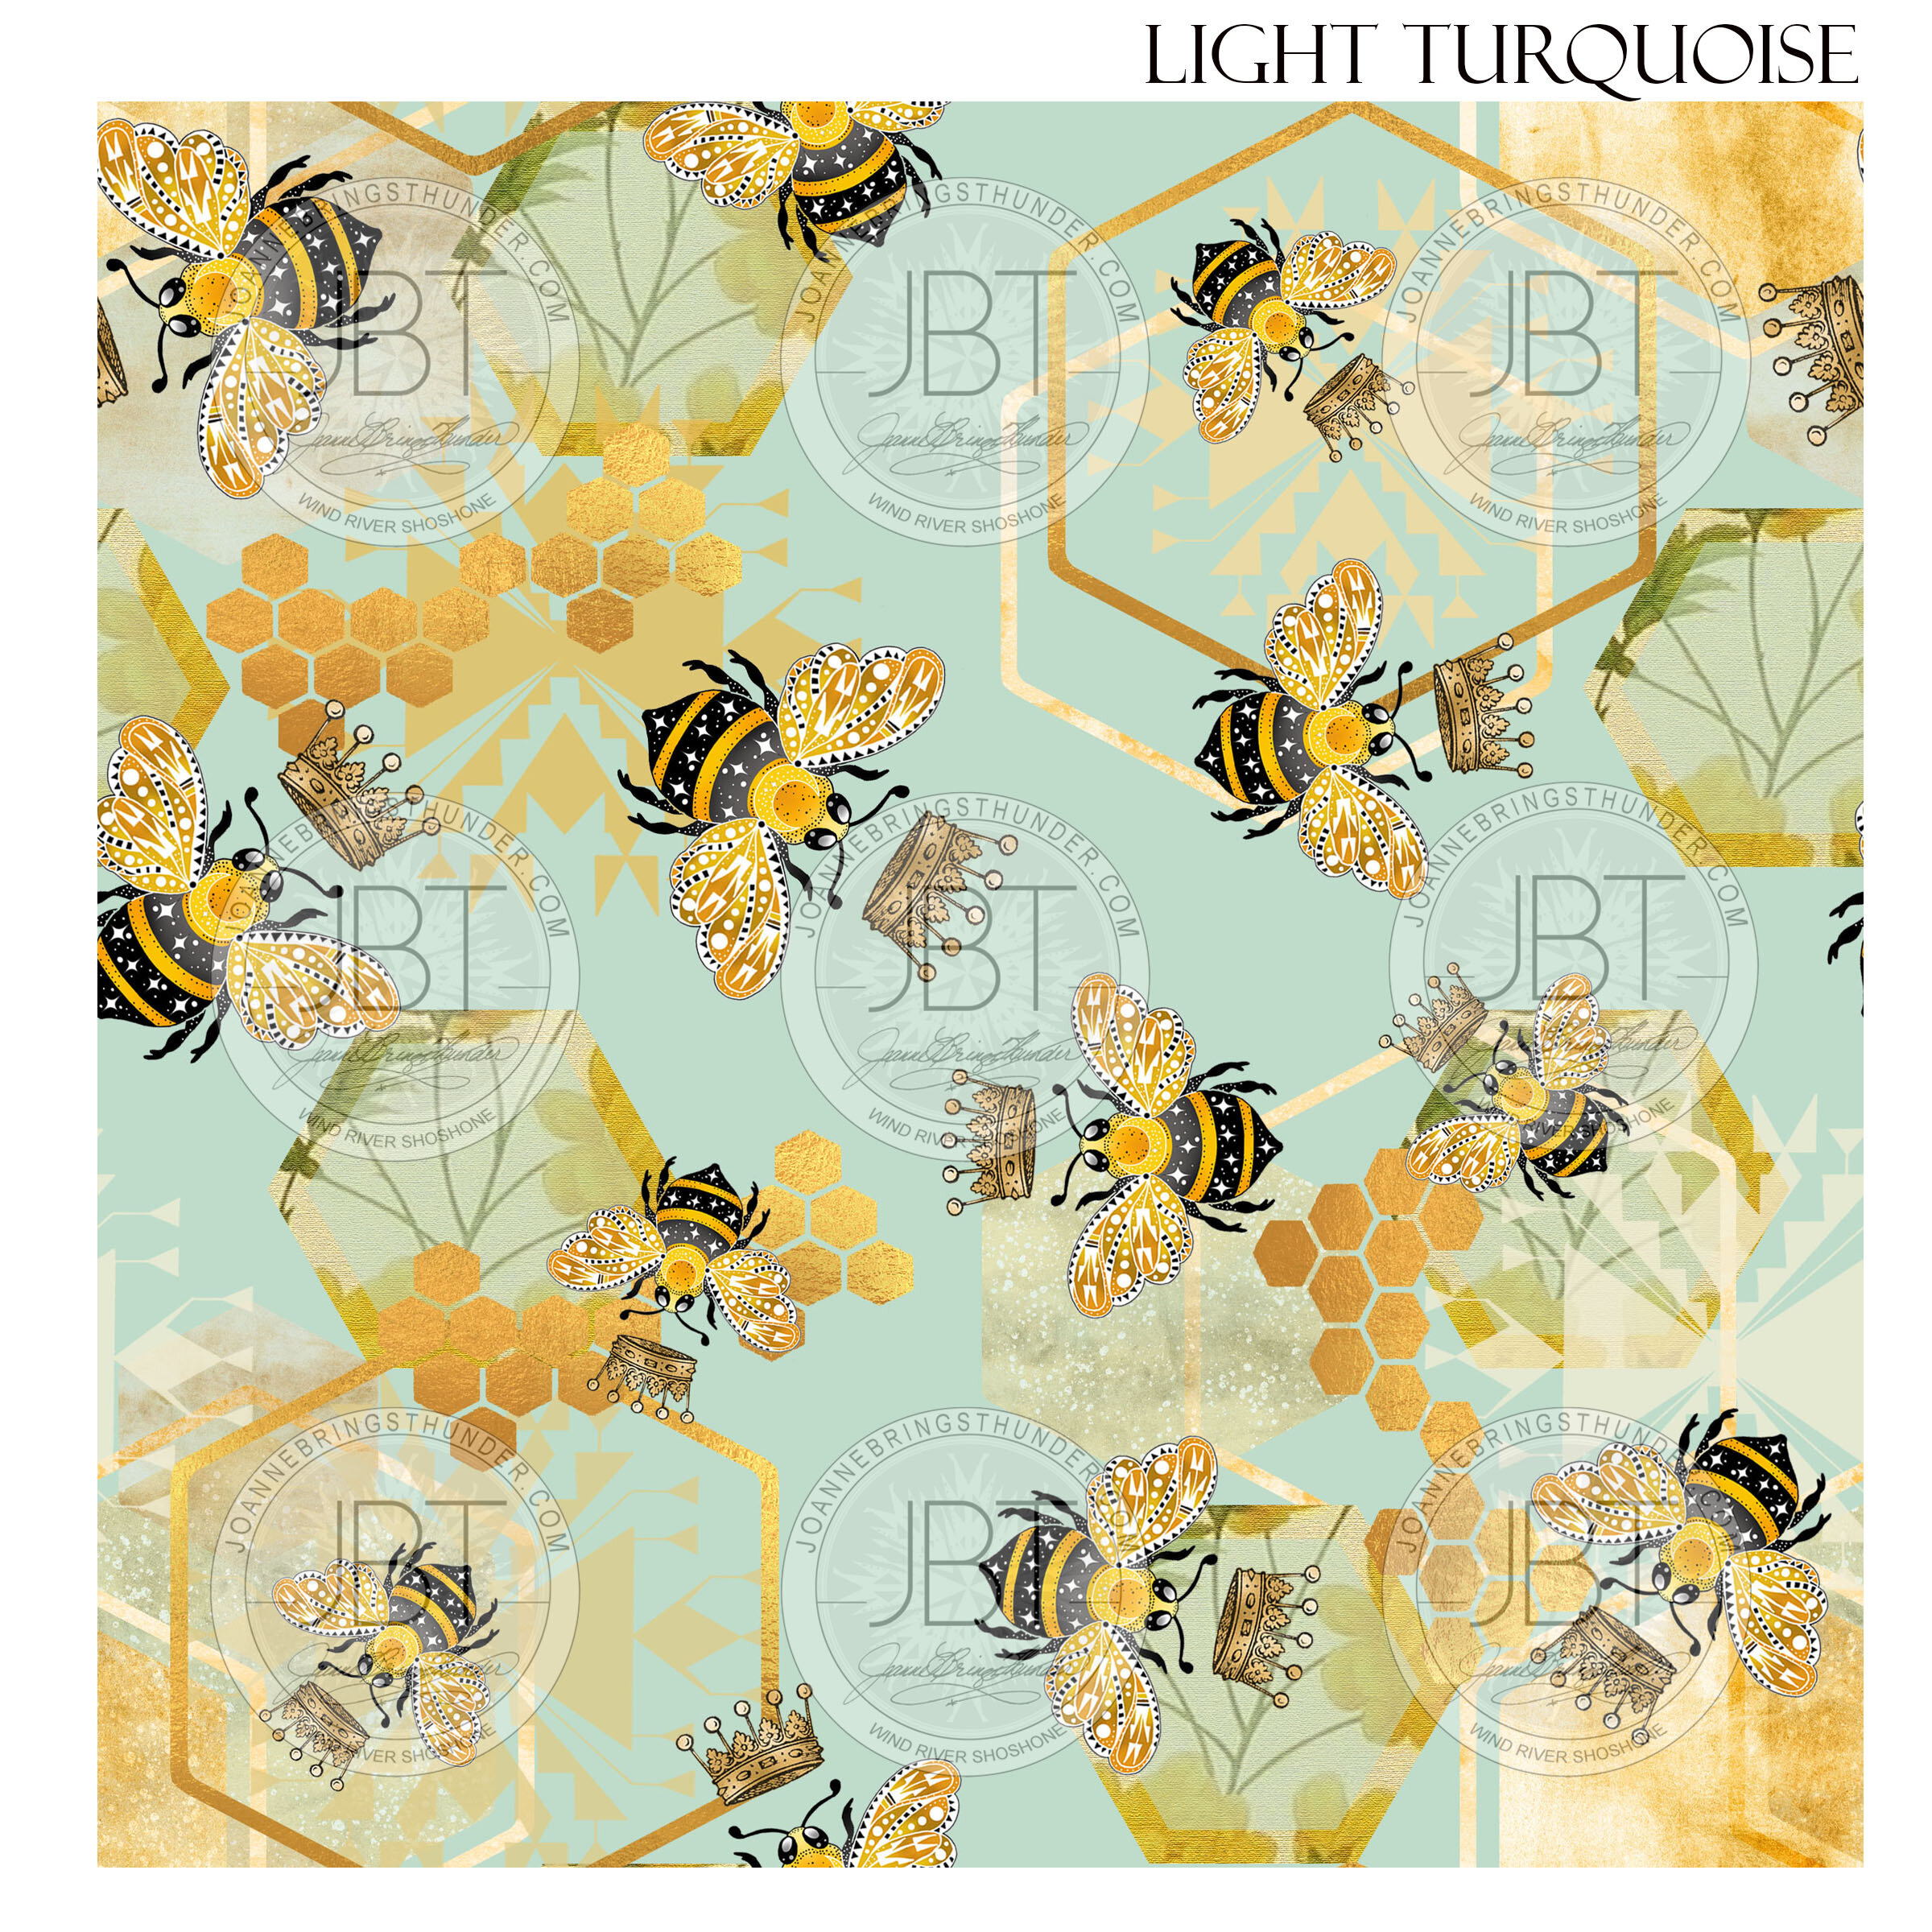 Yellow & White Digital Paper. Yellow Patterned Paper Light 